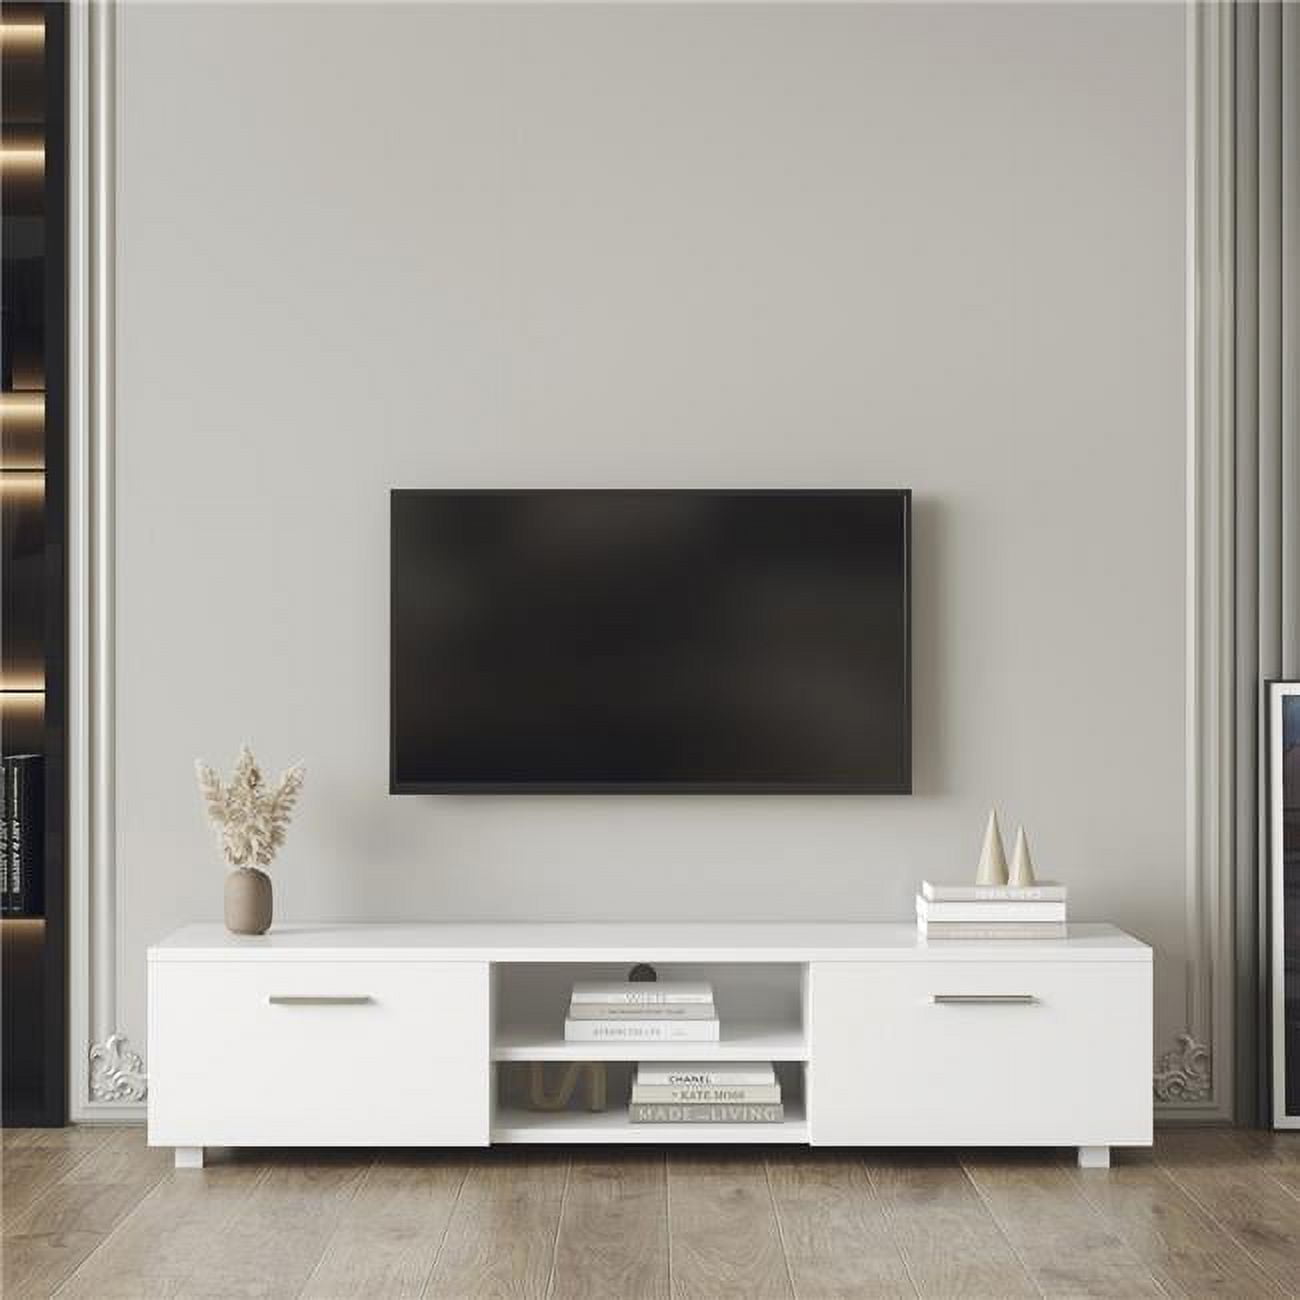 DIRECT WICKER UBS-W33129218 White TV Stand for 70 Inch TV, Media Console Entertainment Center Television Table